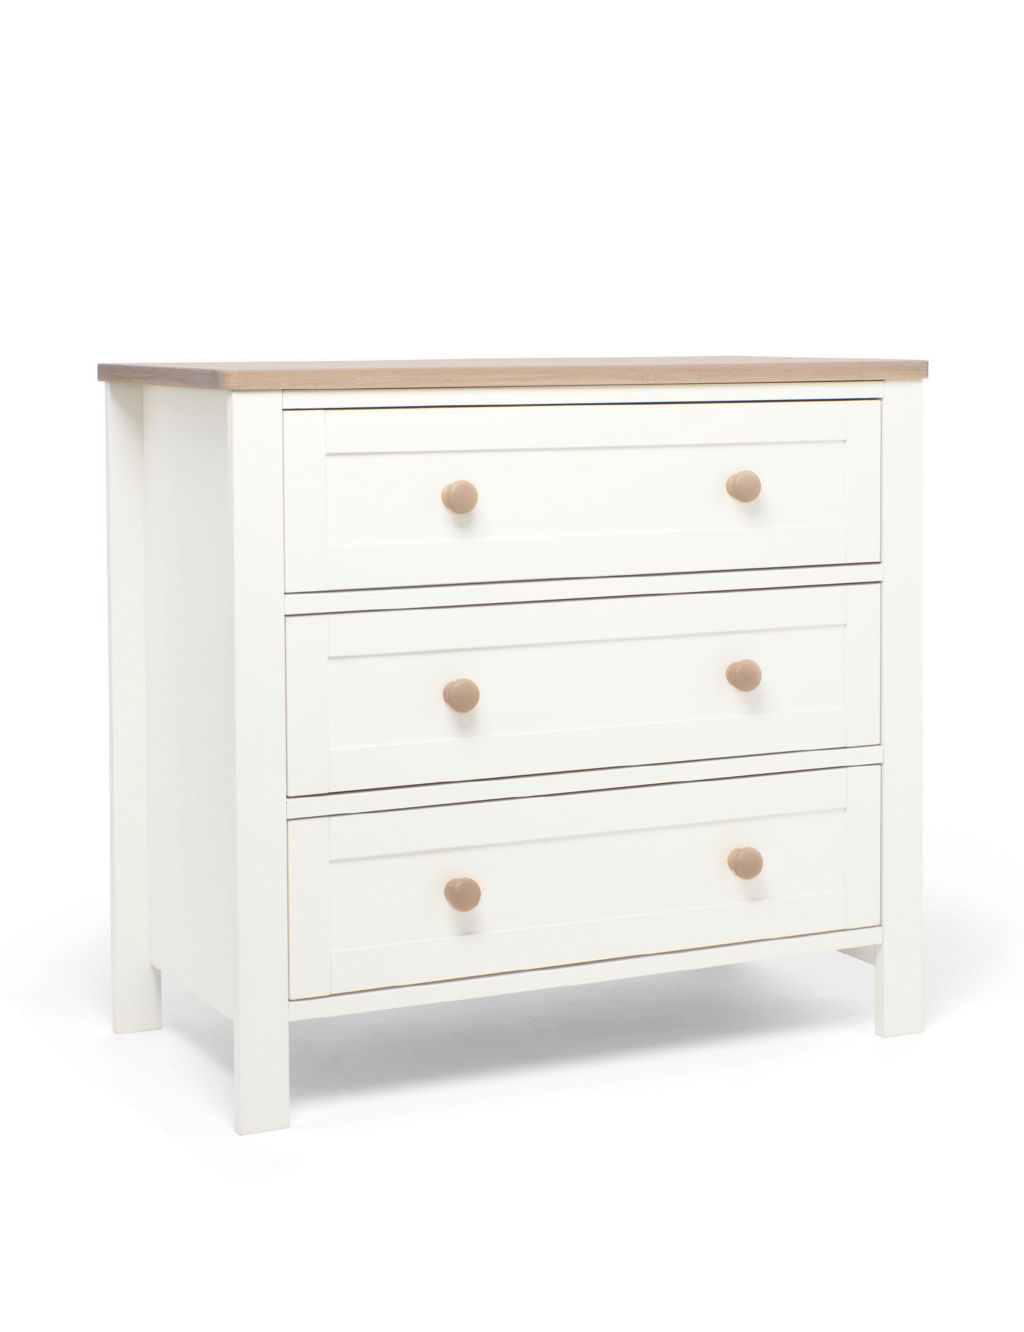 Wedmore 2 Piece Cotbed Set with Dresser image 7